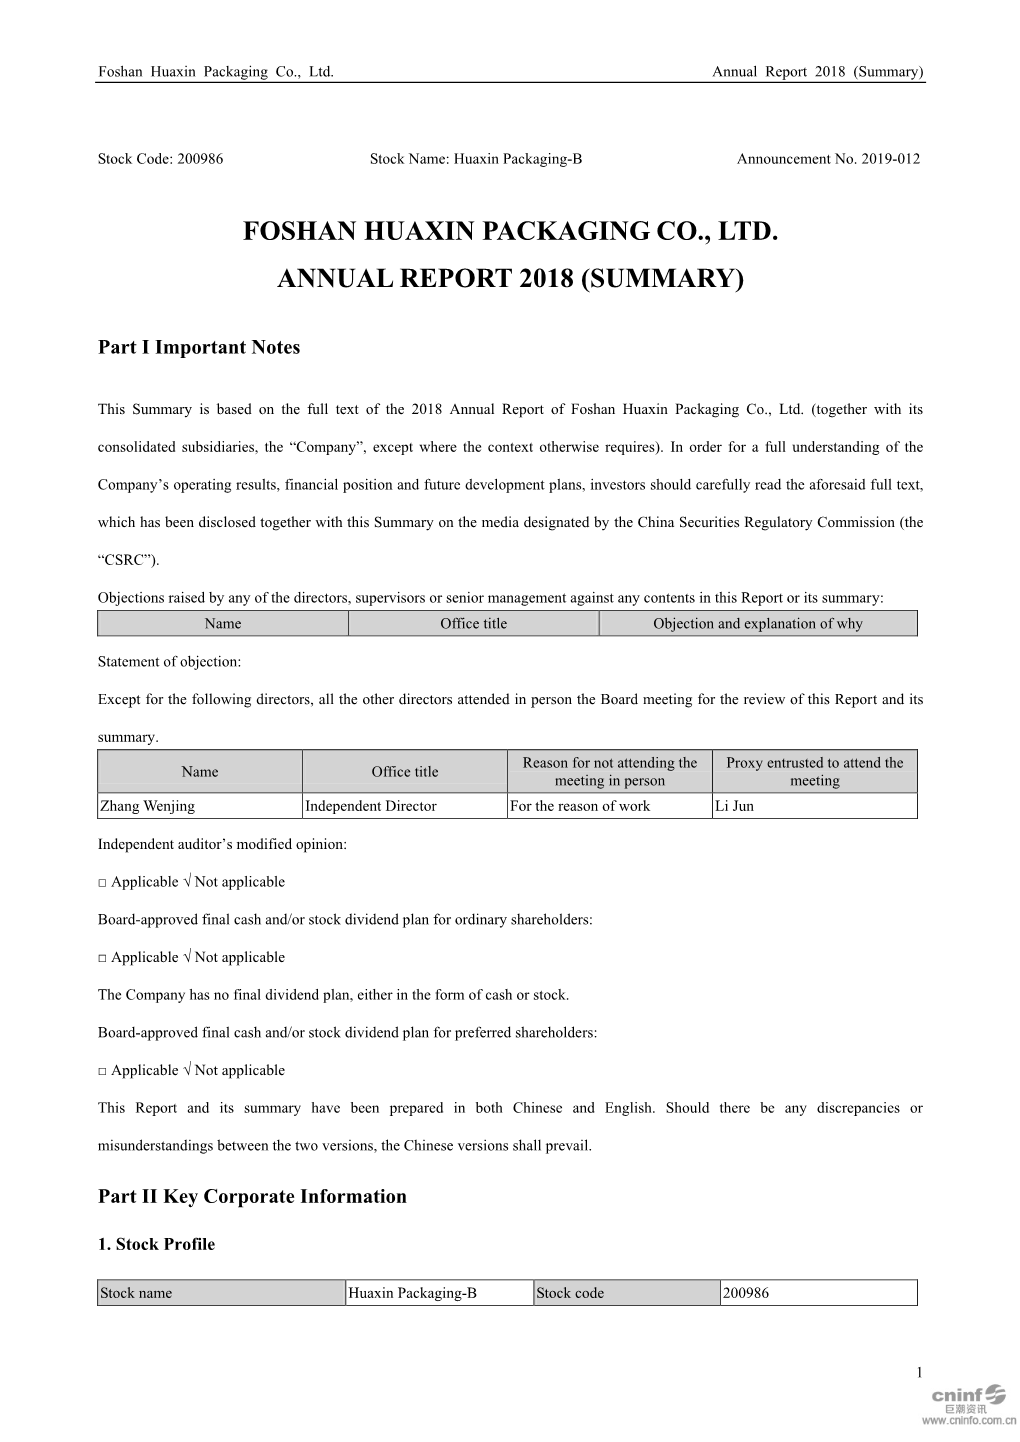 Foshan Huaxin Packaging Co., Ltd. Annual Report 2018 (Summary)